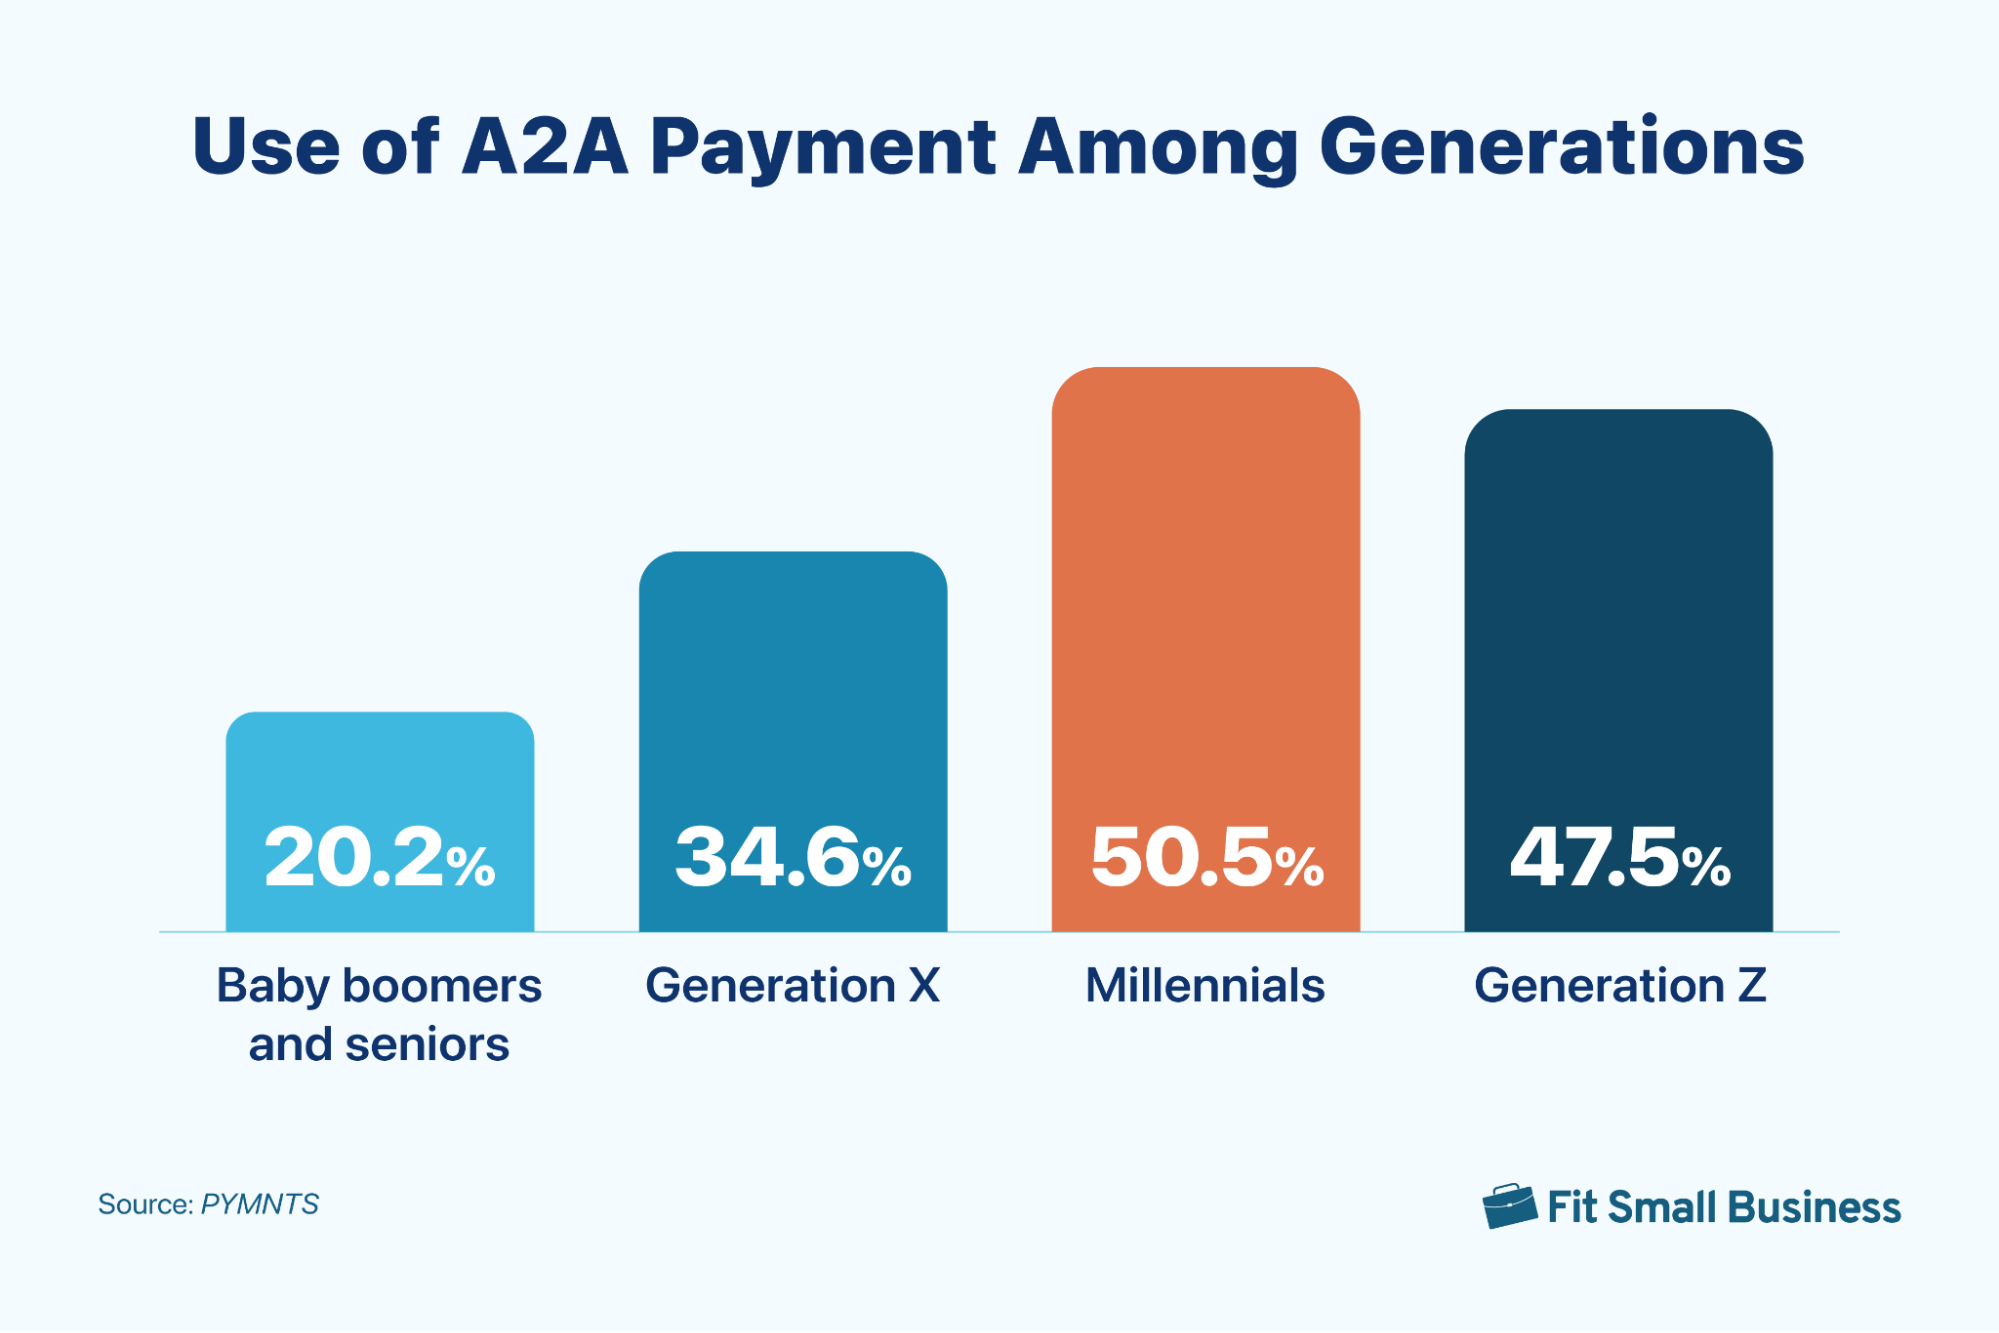 Bar graph showing use of A2A payment across generations.